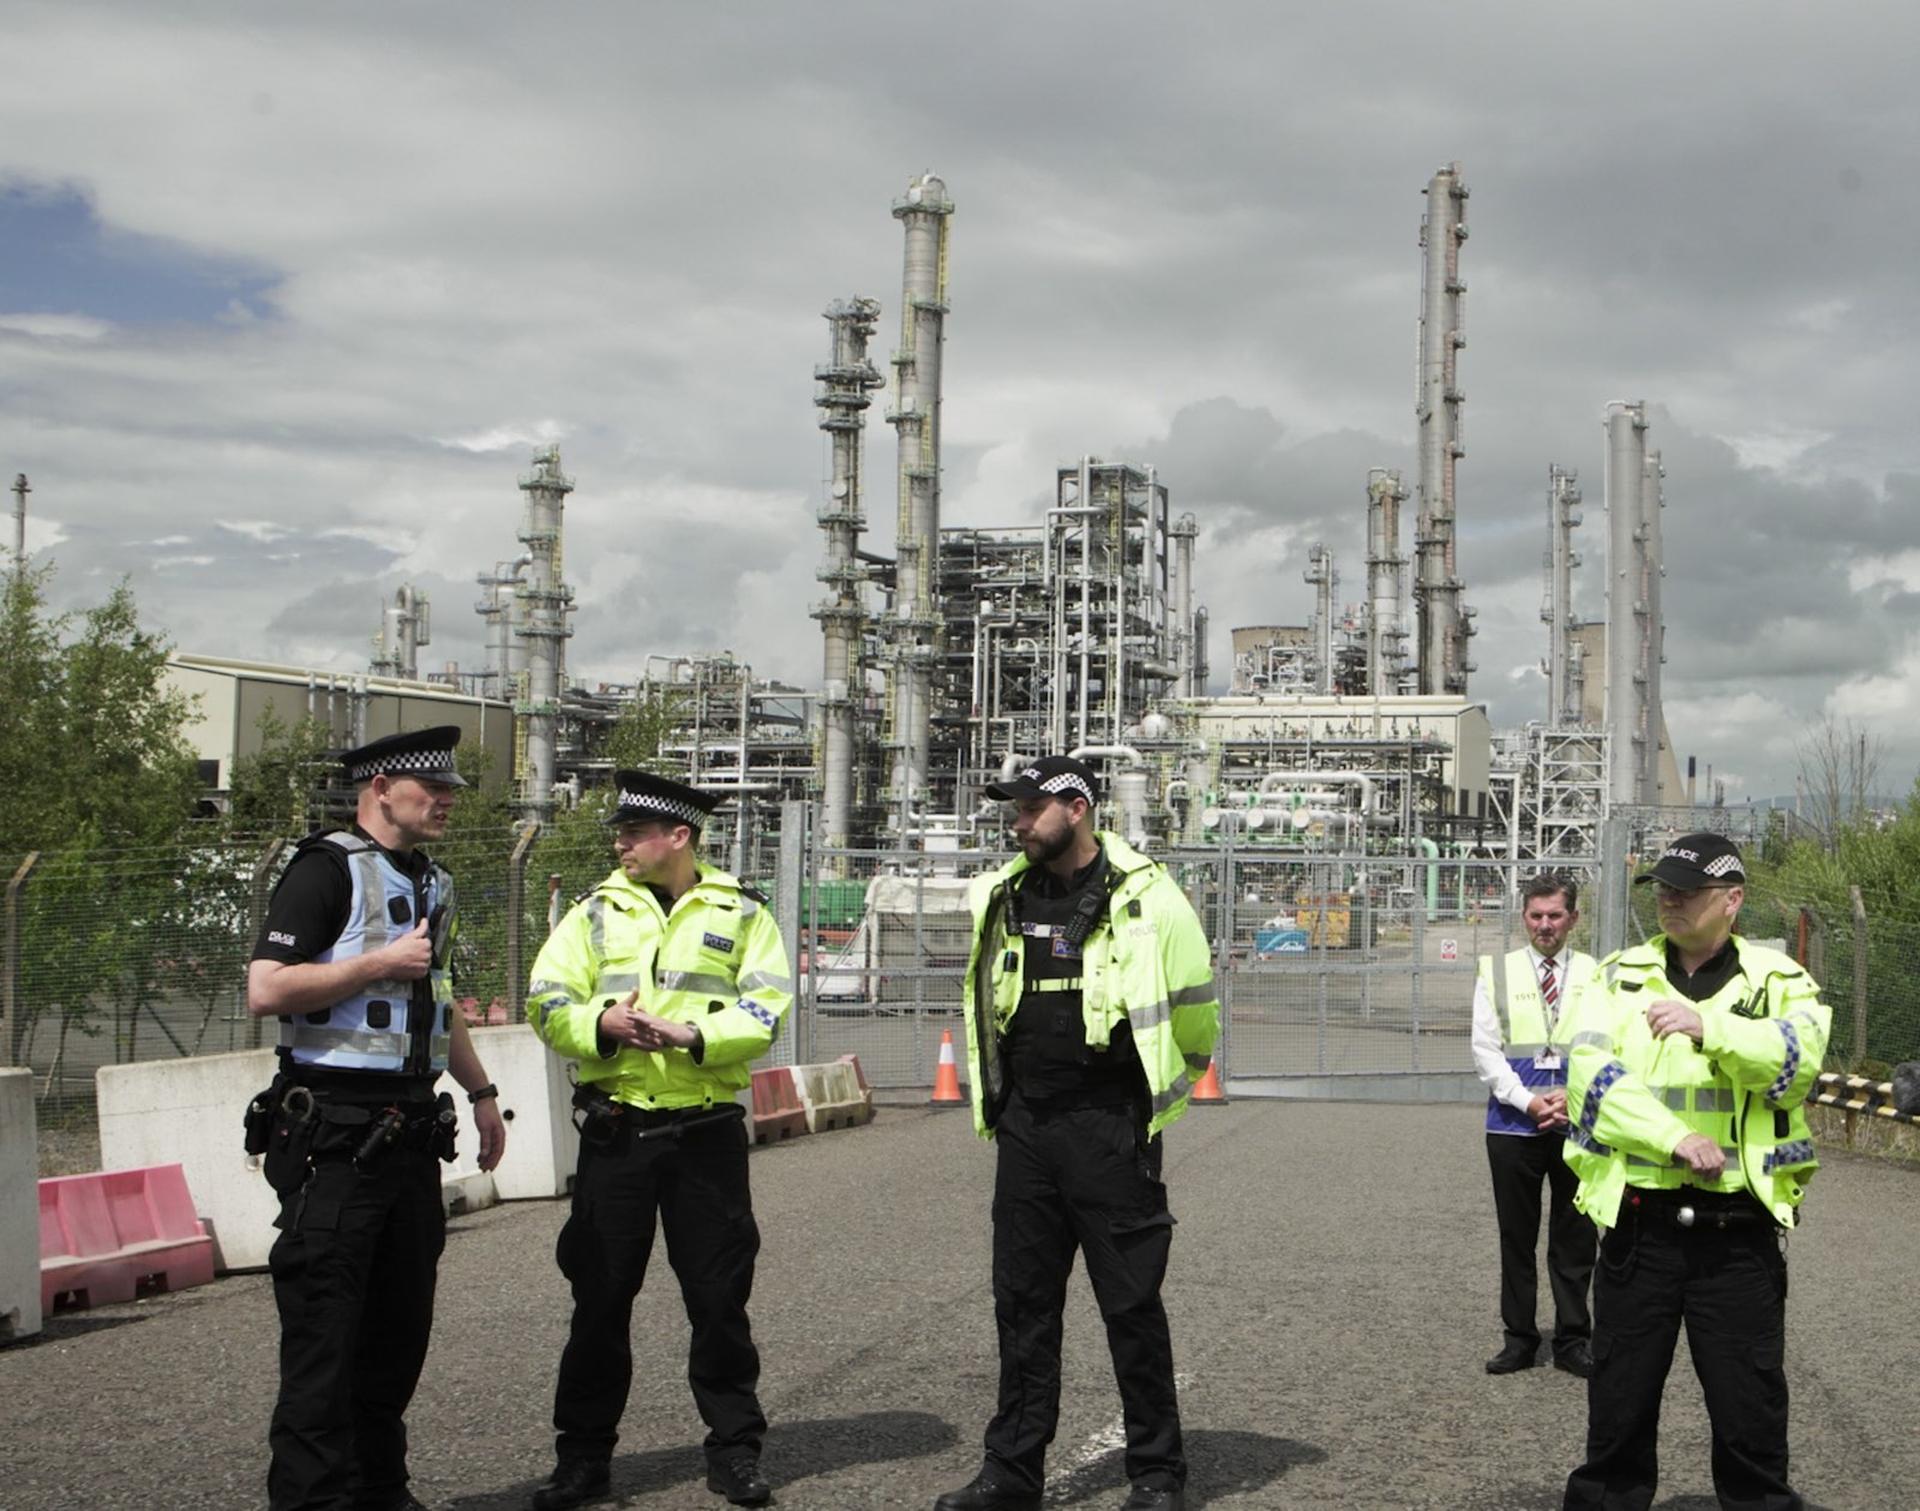 Police were outside the refinery on Saturday.